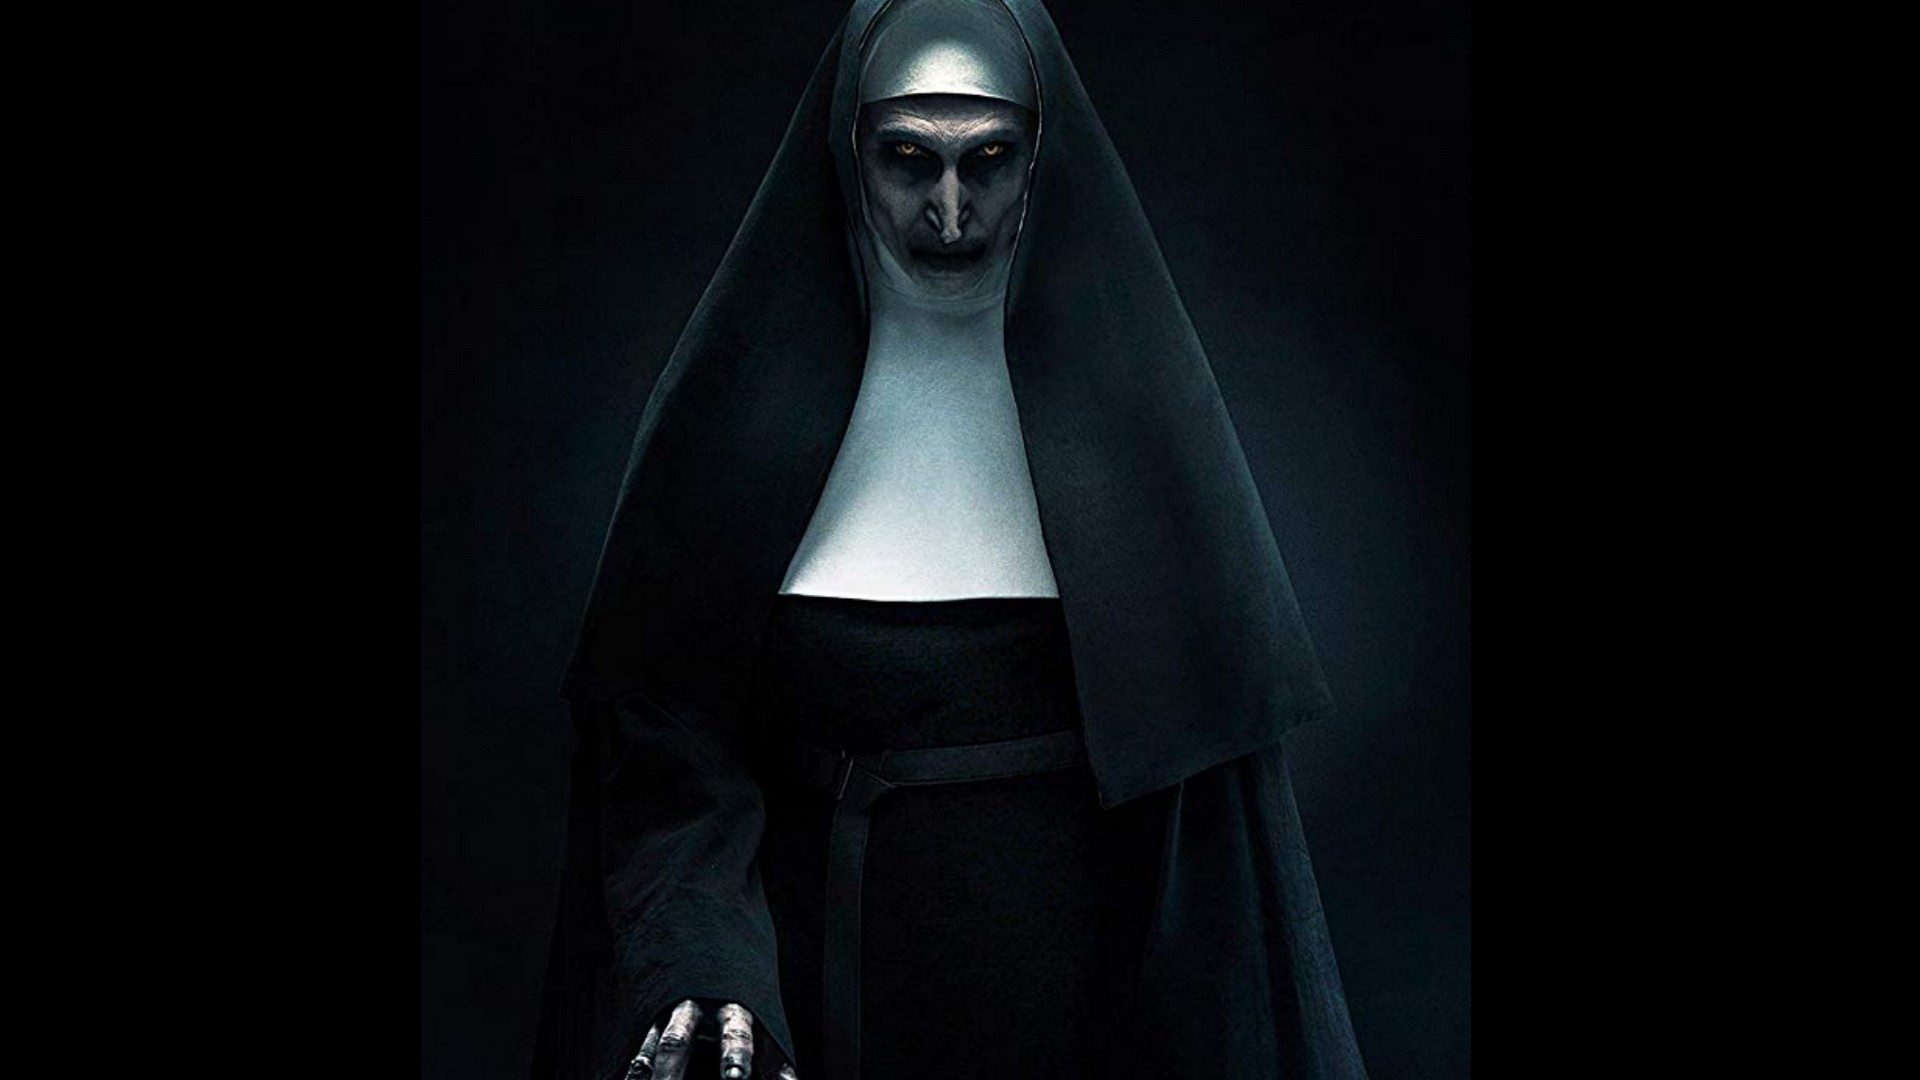 The Nun Wallpaper with image resolution 1920x1080 pixel. You can use this wallpaper as background for your desktop Computer Screensavers, Android or iPhone smartphones